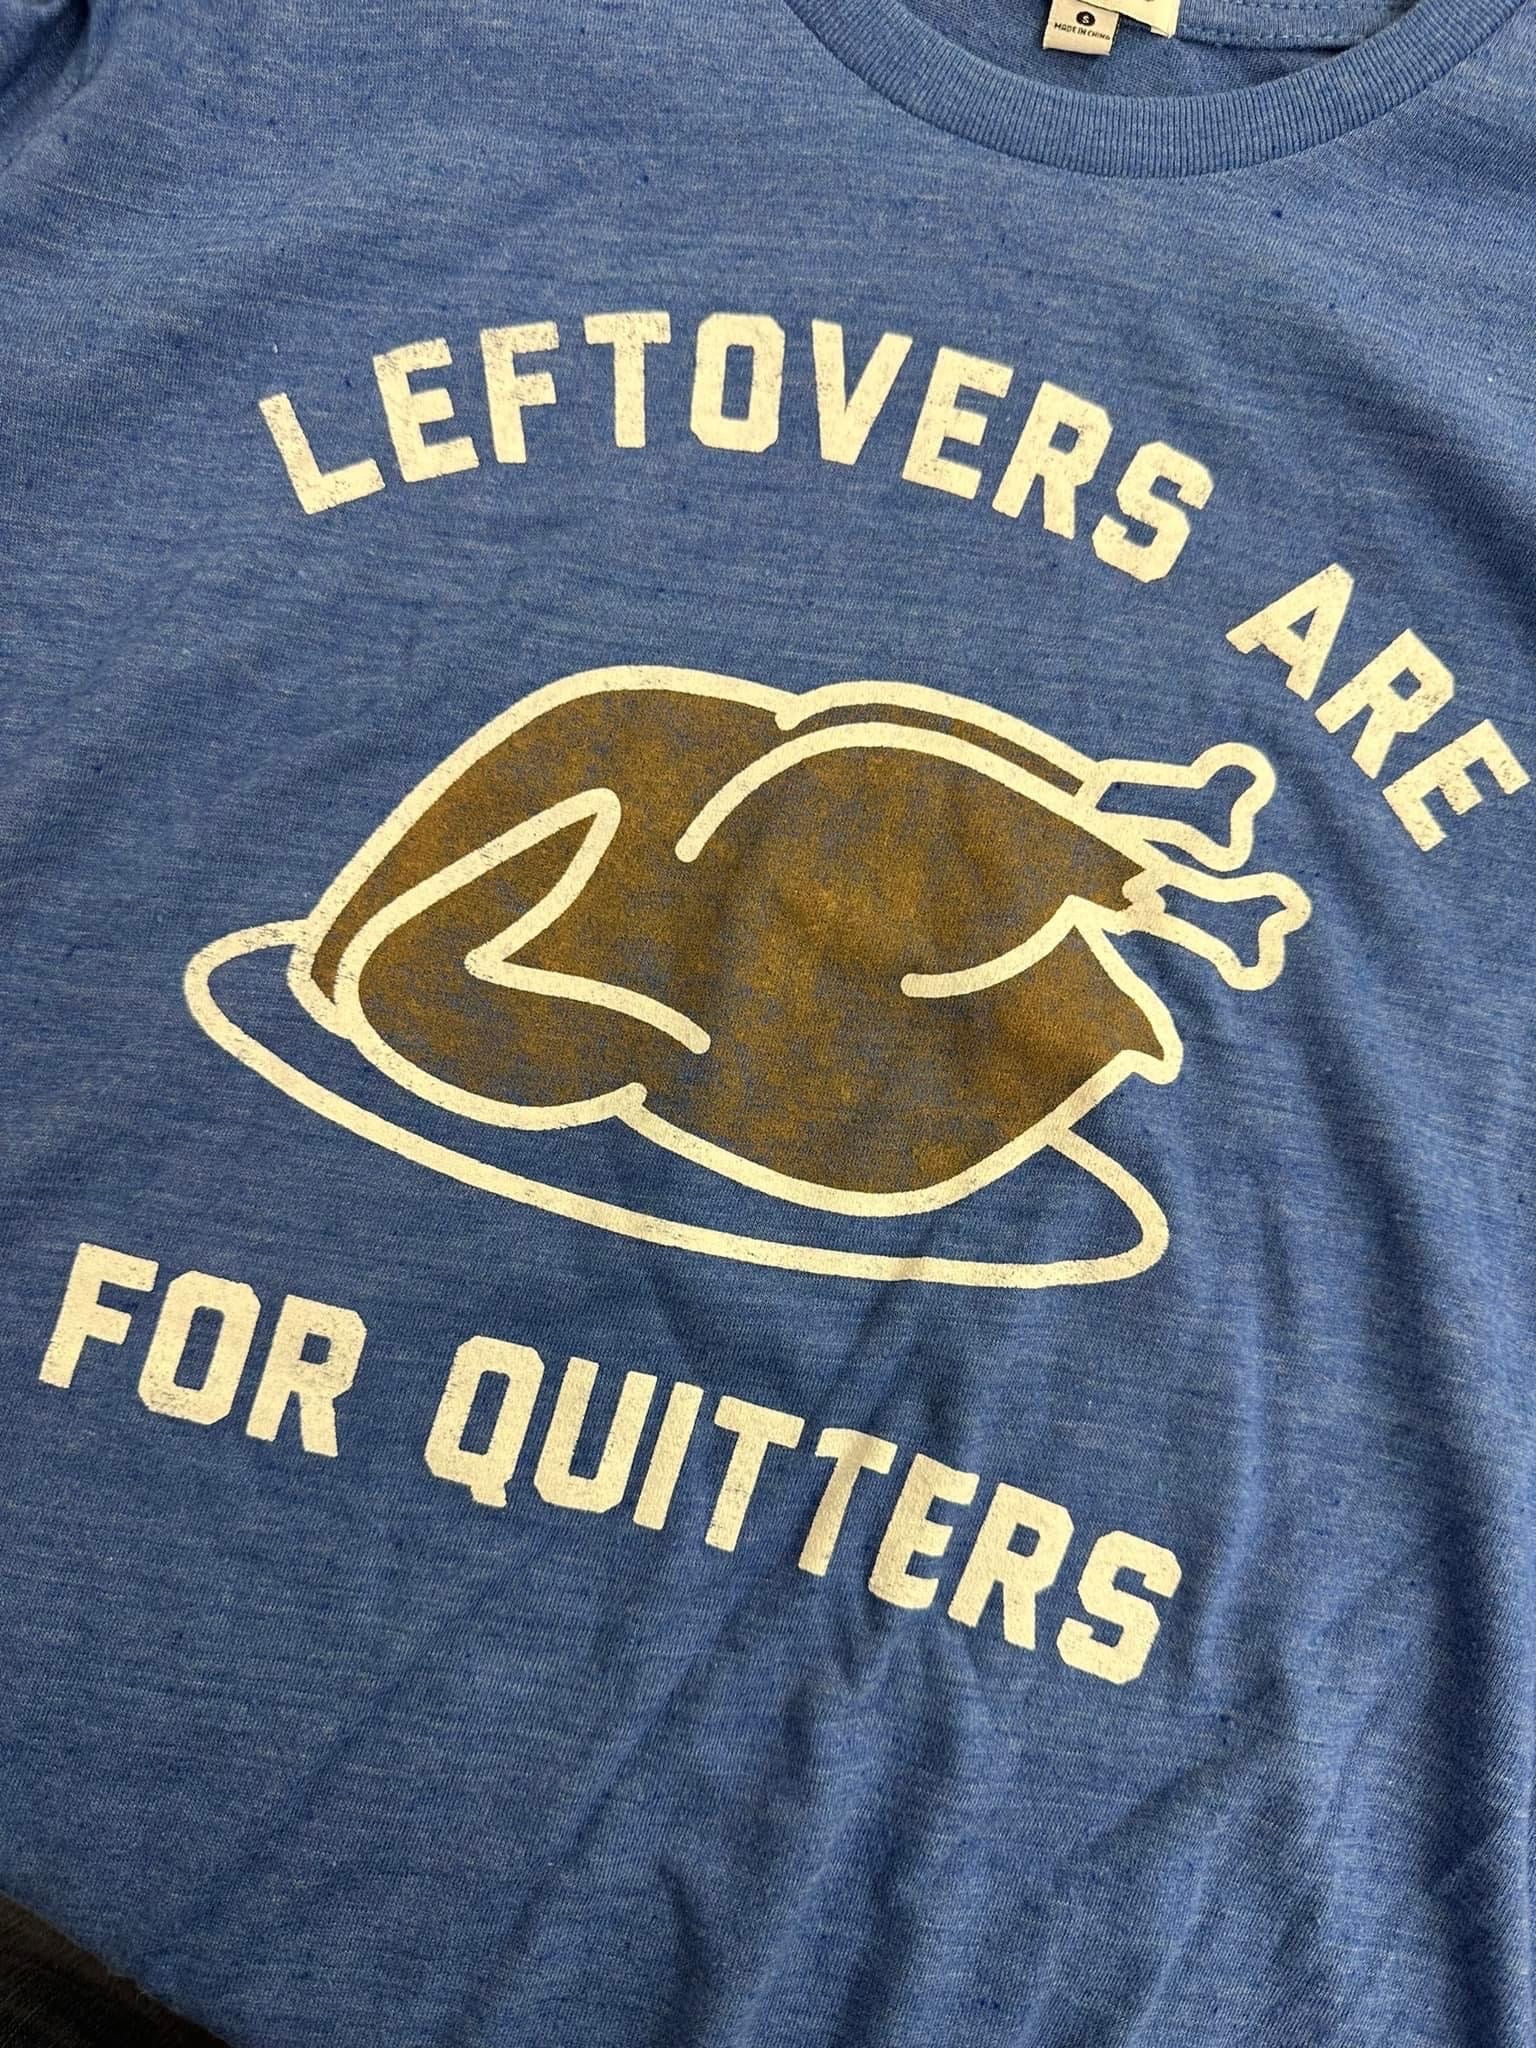 Leftovers are for Quitters Graphic Tee